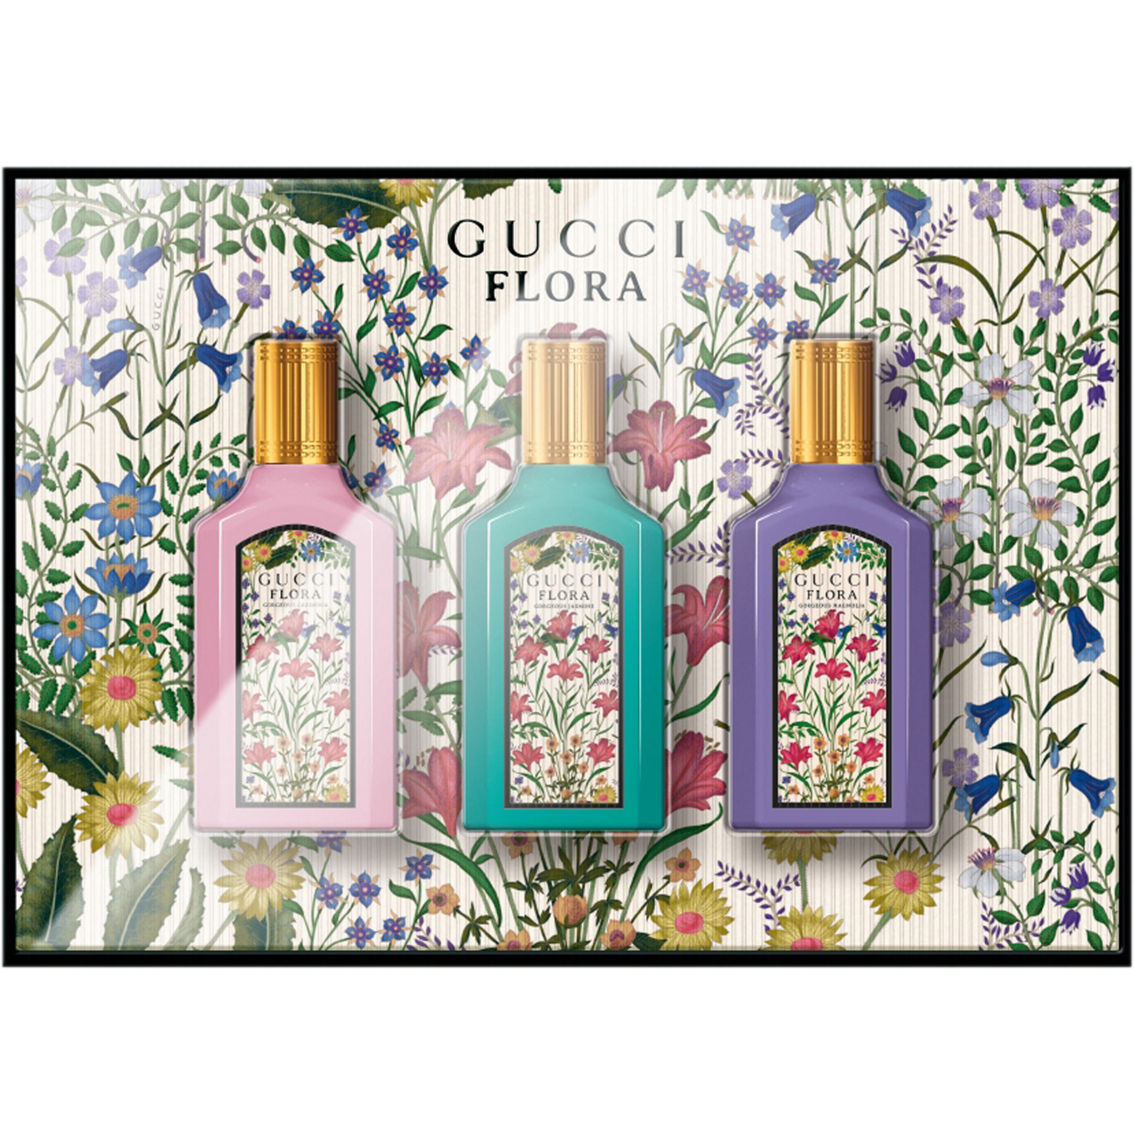 Gucci Flora Mini Trio Gift Set, Gifts Sets For Her